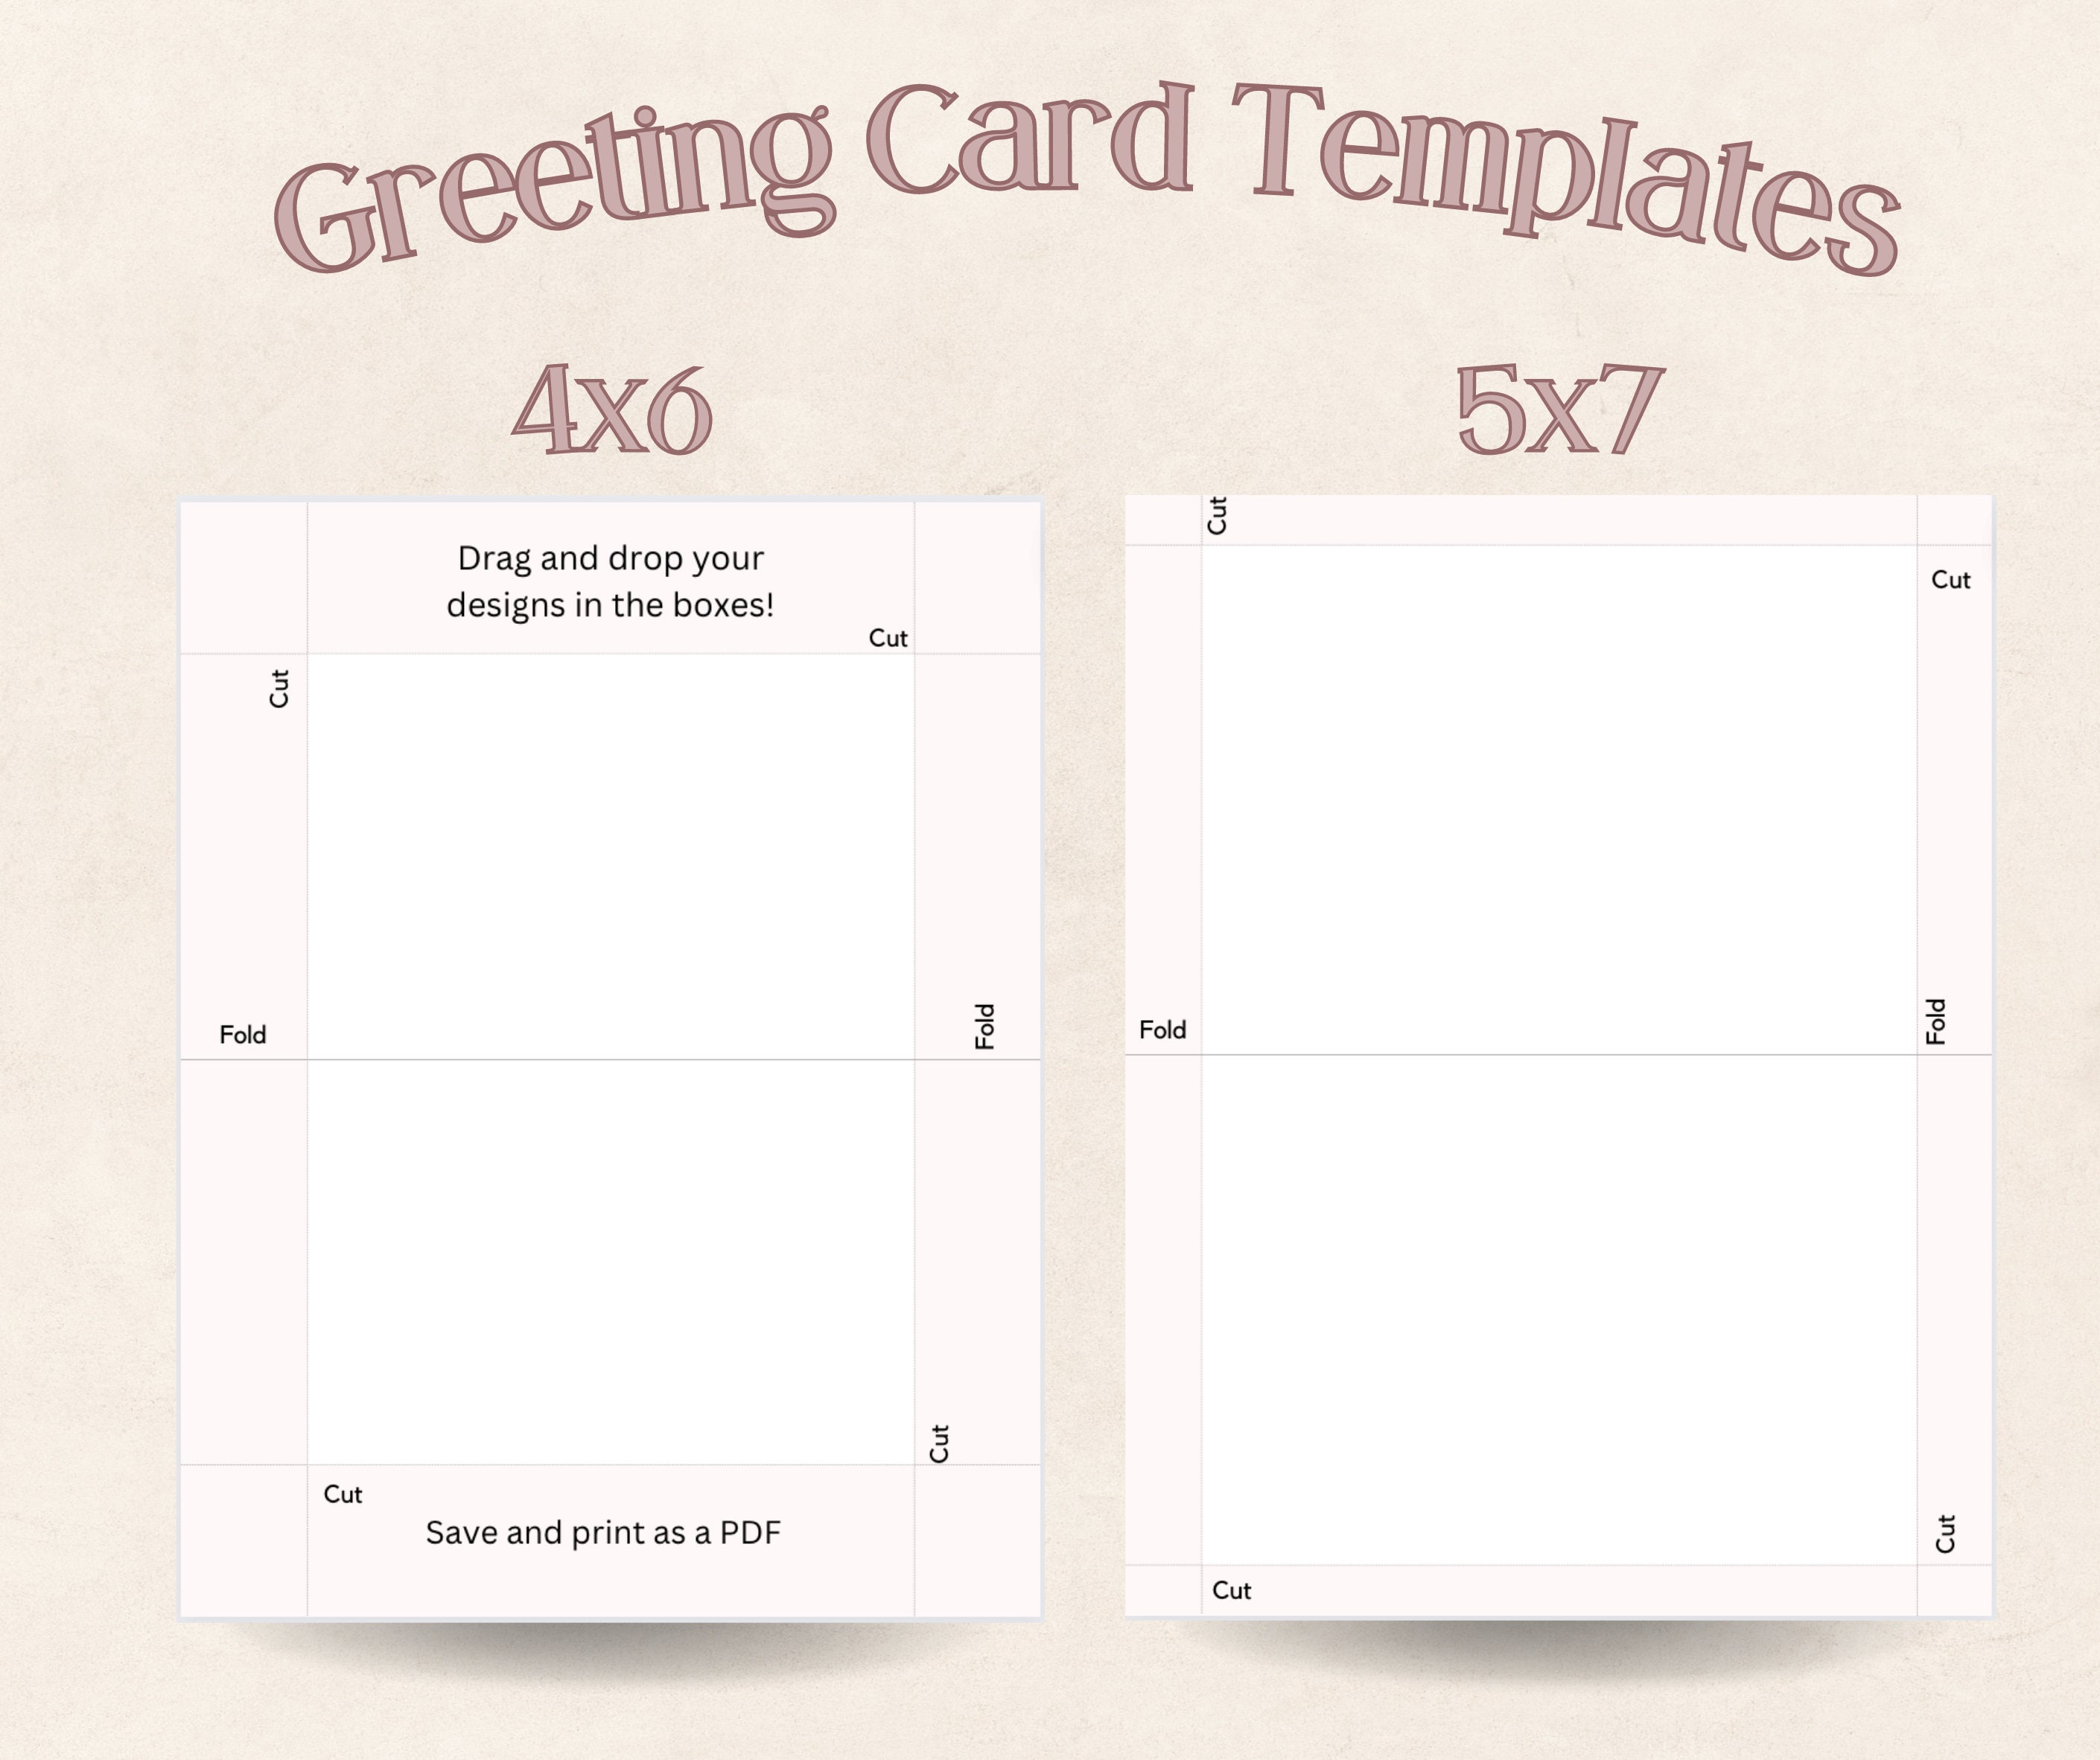 drag-and-drop-greeting-card-templates-4x6-and-5x7-foldable-etsy-canada